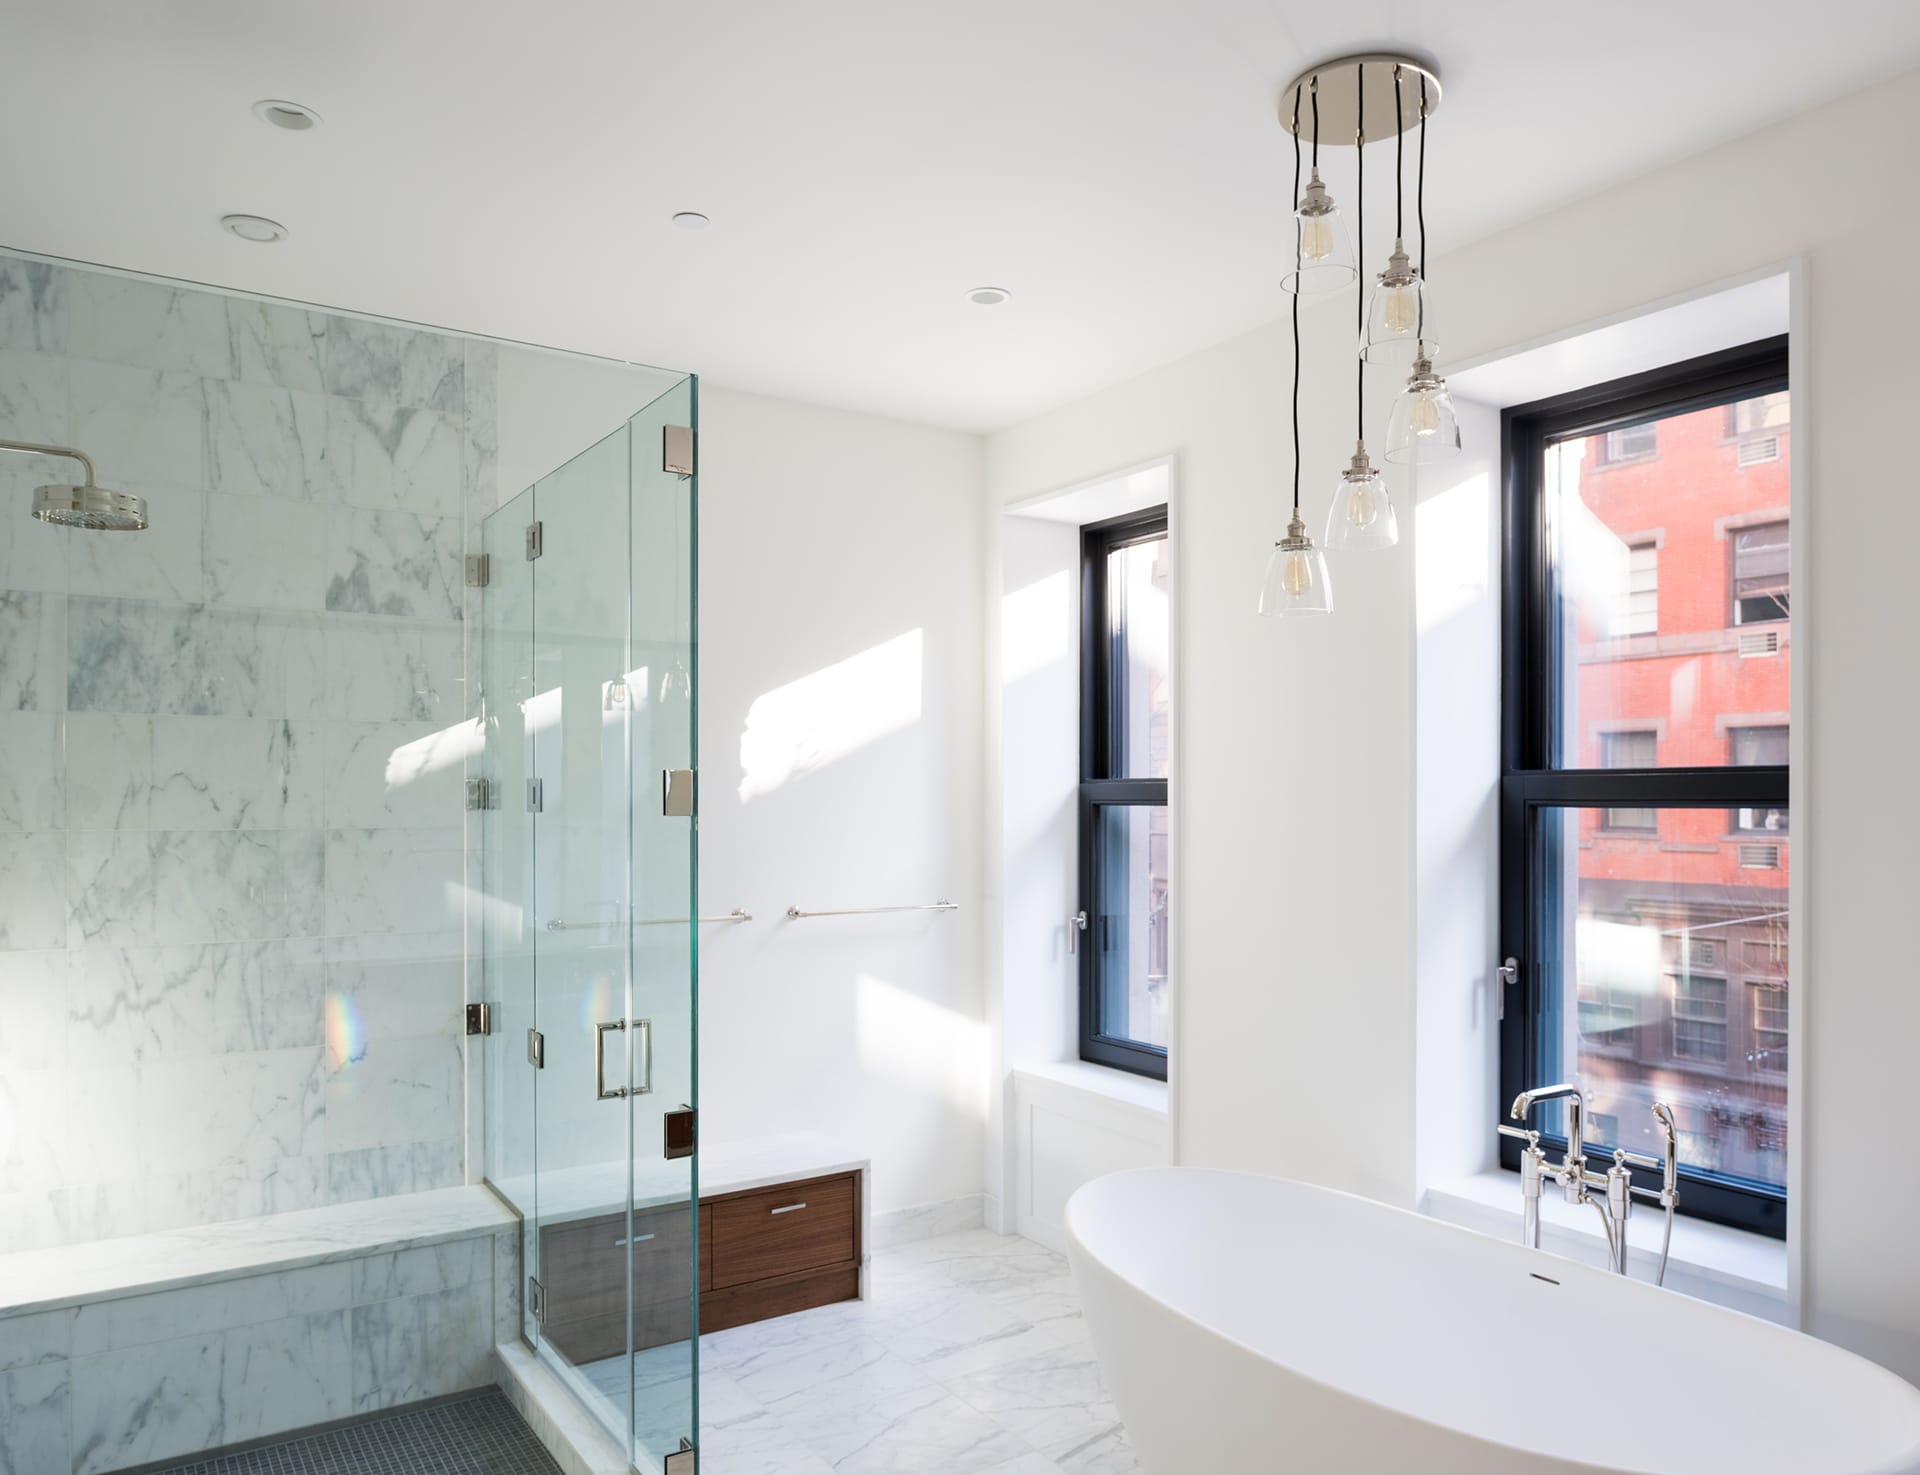 Shower stall, light fixture, and freestanding bathtub in the primary bathroom of an Upper West Side Passive House.